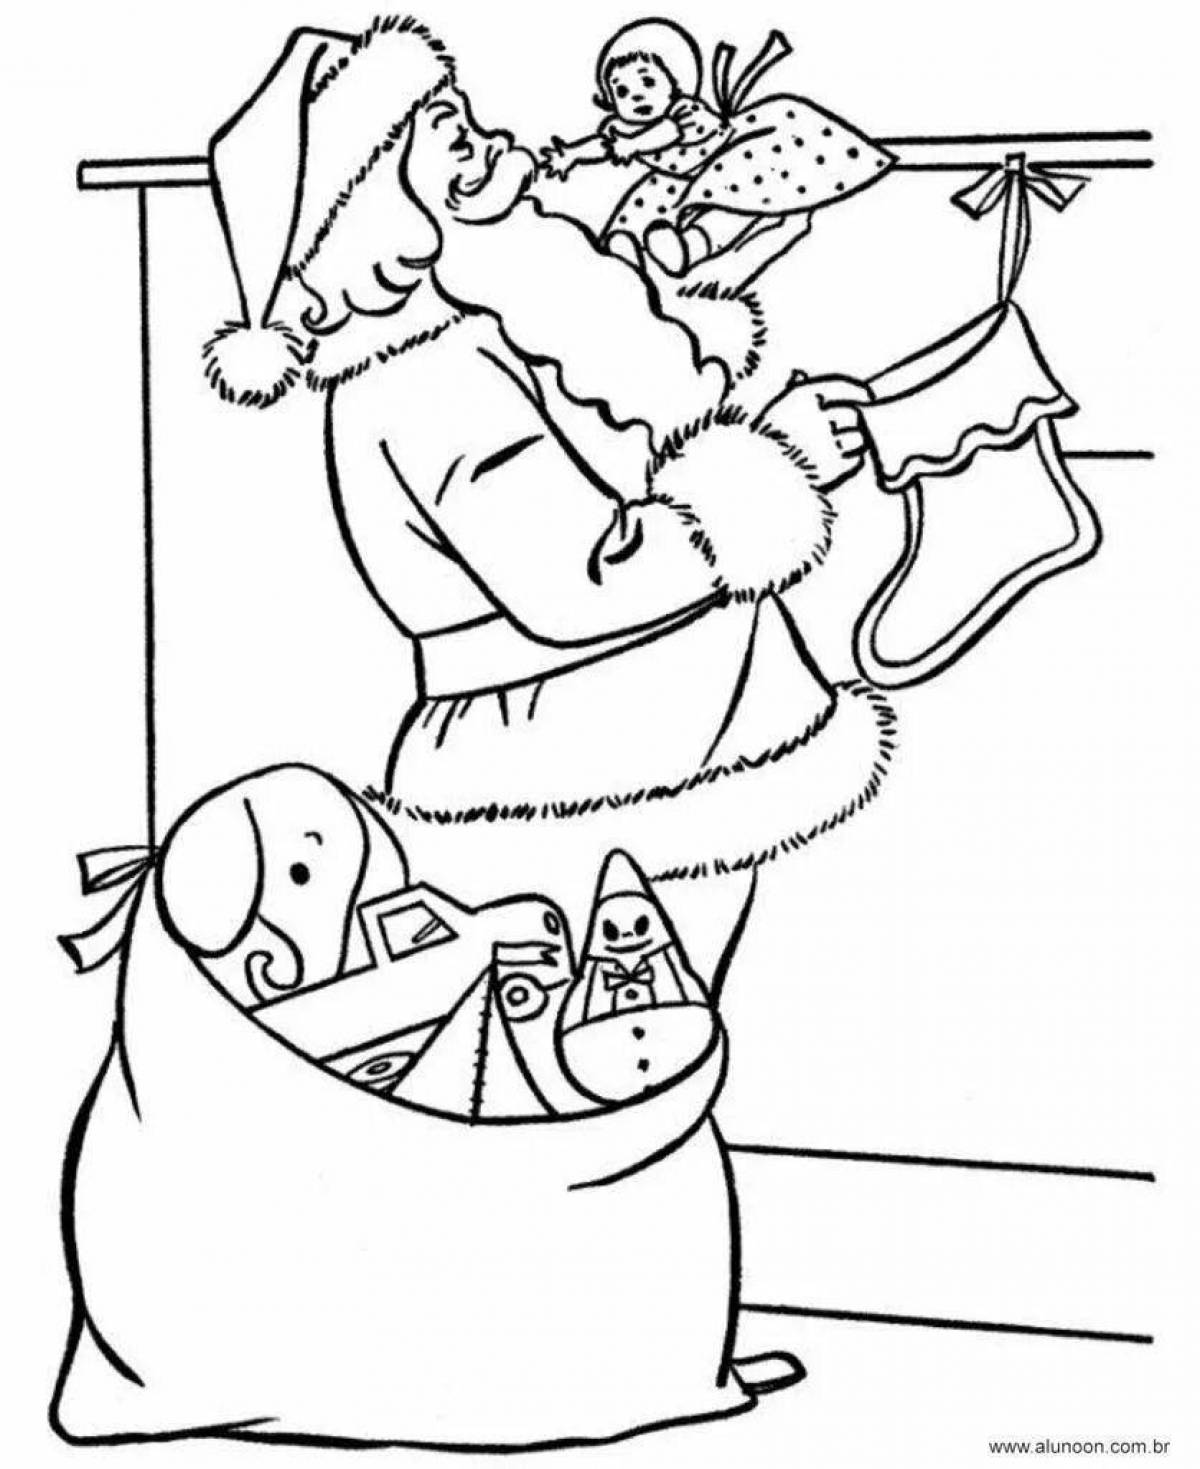 Violent Christmas story coloring book